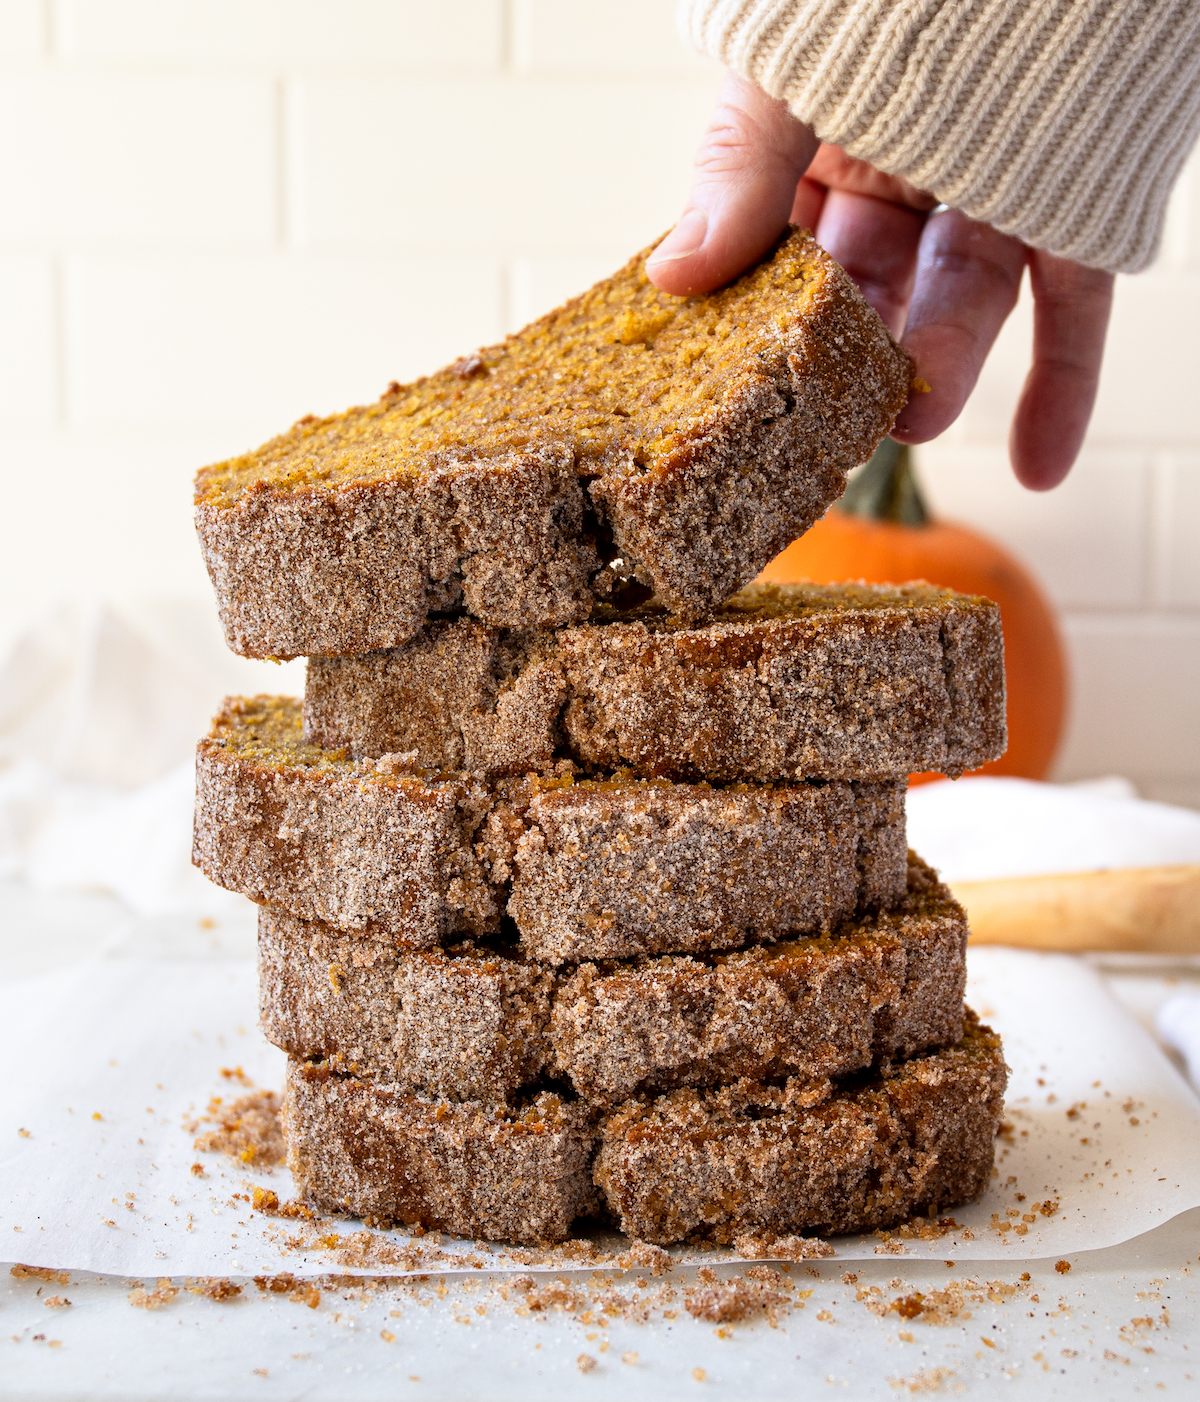 Stack of pumpkin bread slices with a hand grabbing one.